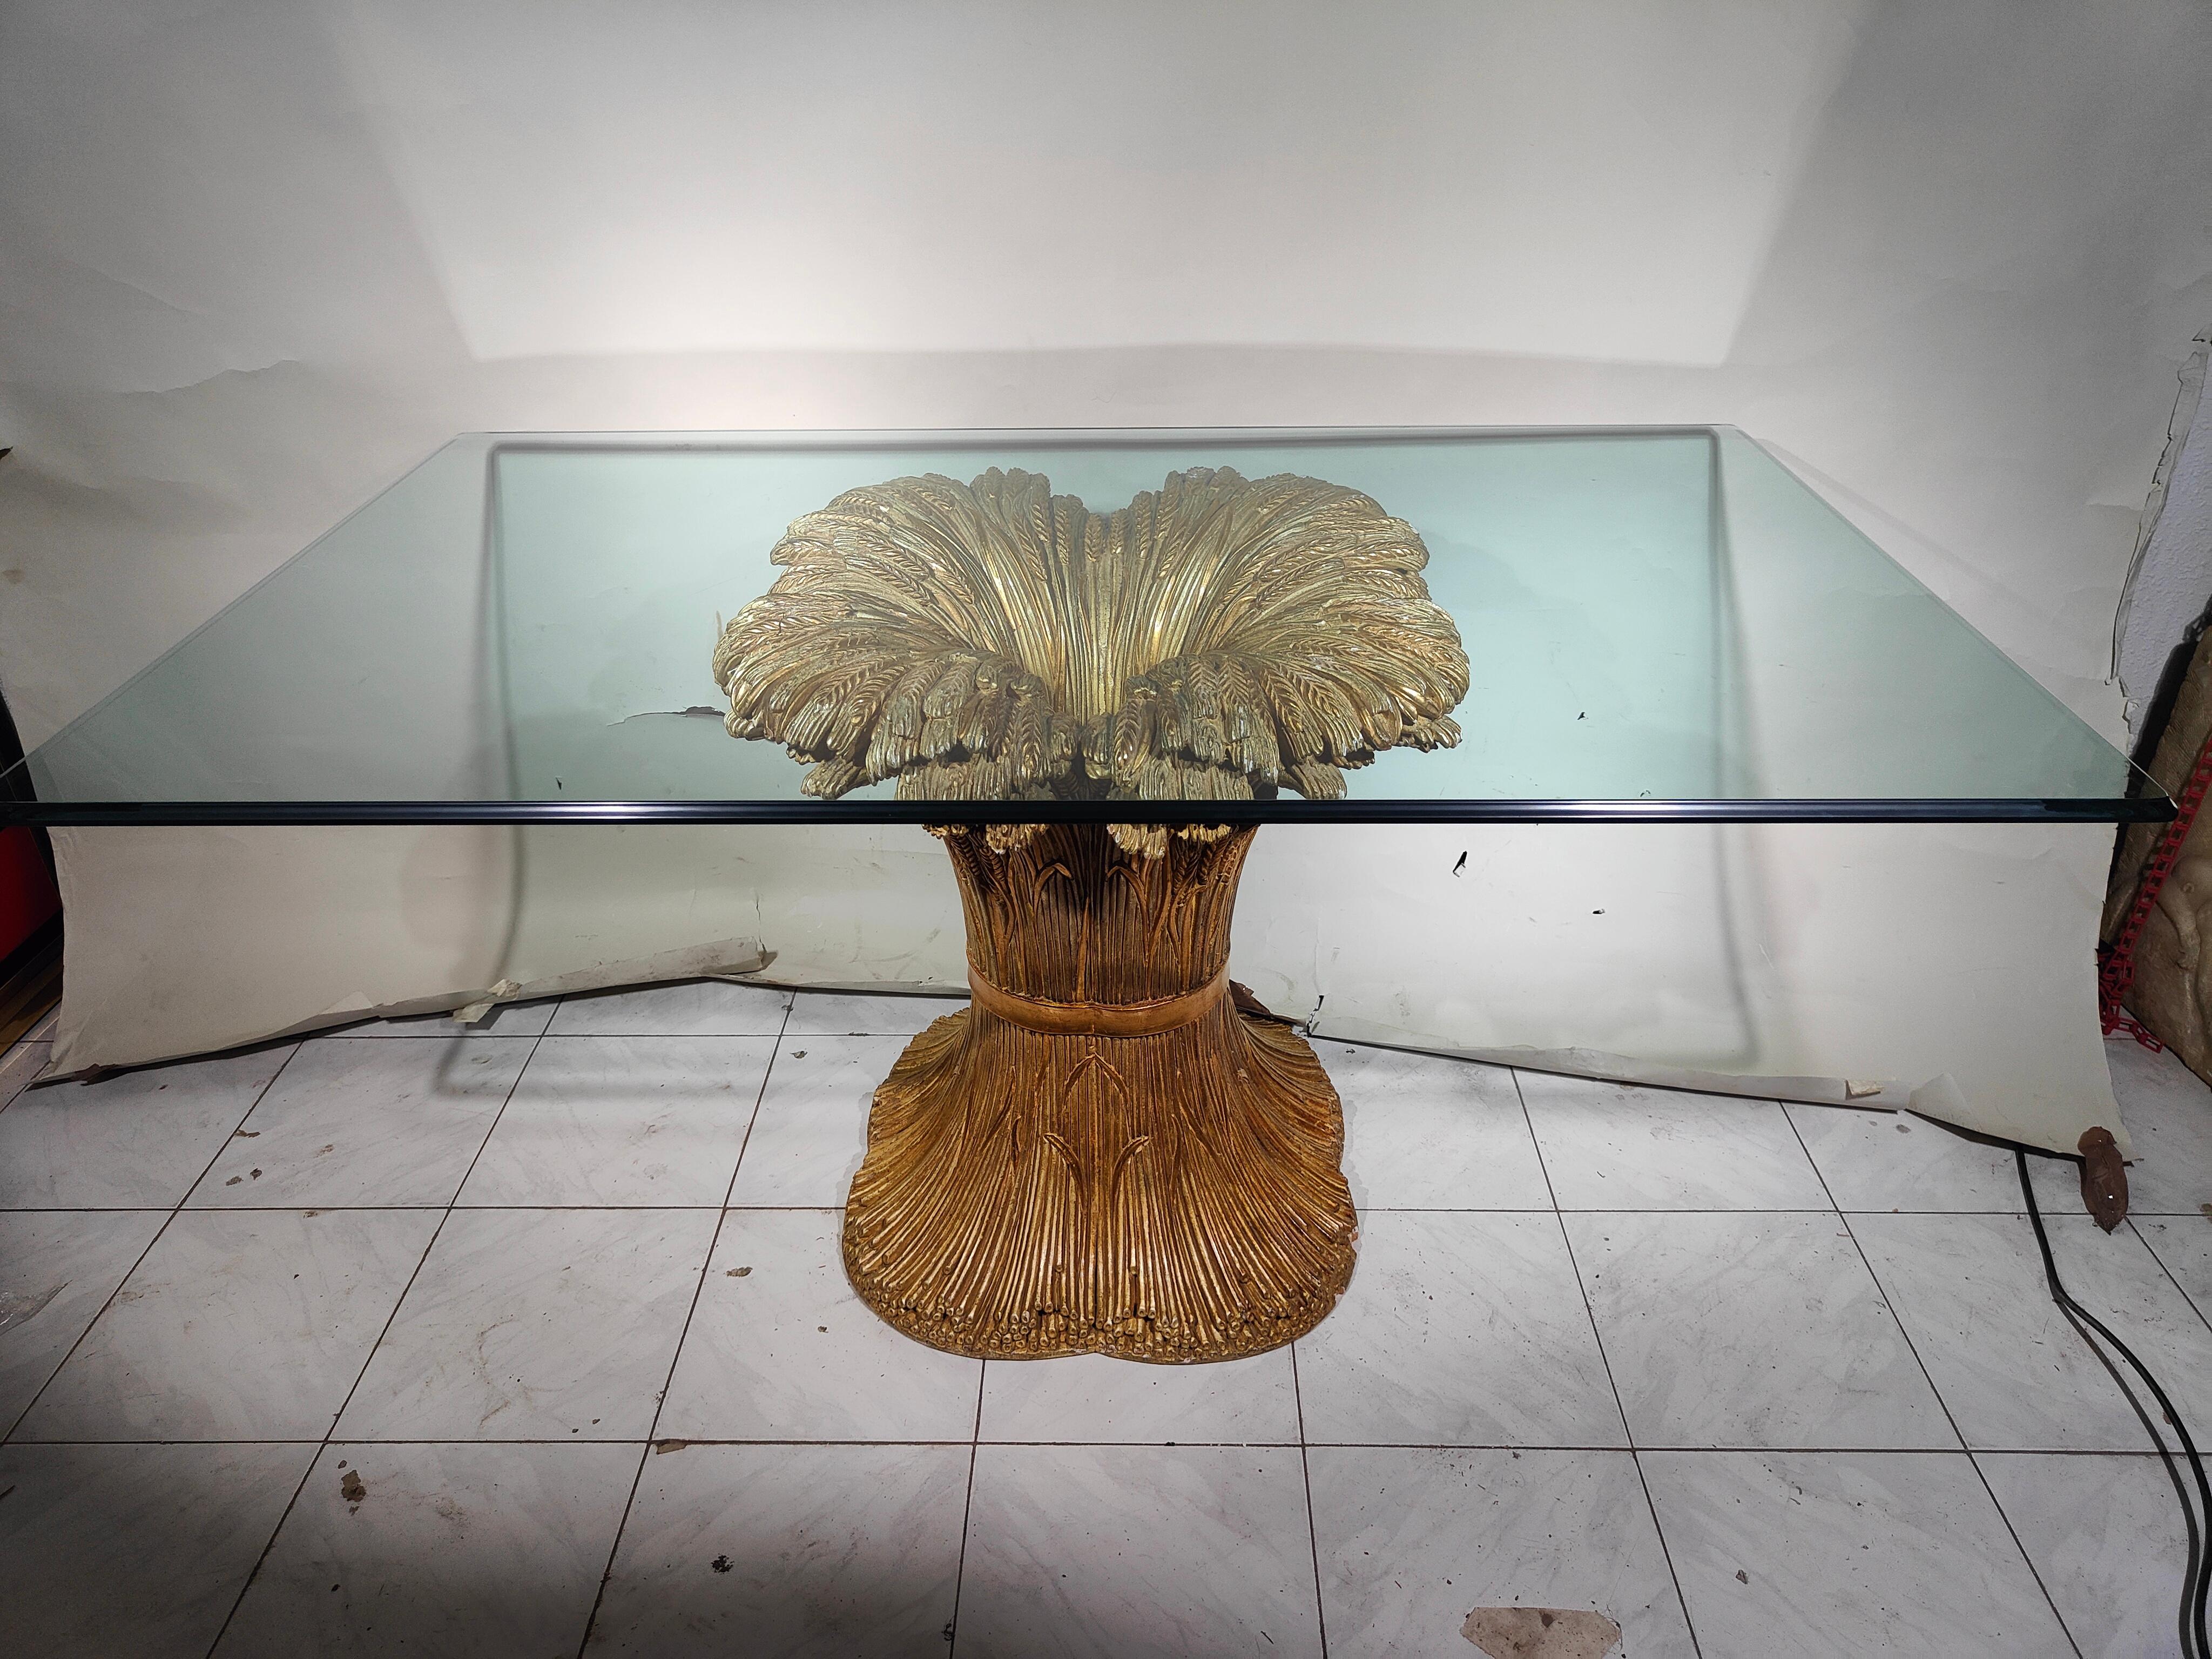 1950s French Dining Table: Timeless Elegance with Harvest Allegory
Immerse yourself in the timeless elegance of the 1950s with this exquisite dining table, where the glass top reveals its splendor. The central pedestal, a masterpiece of carved and